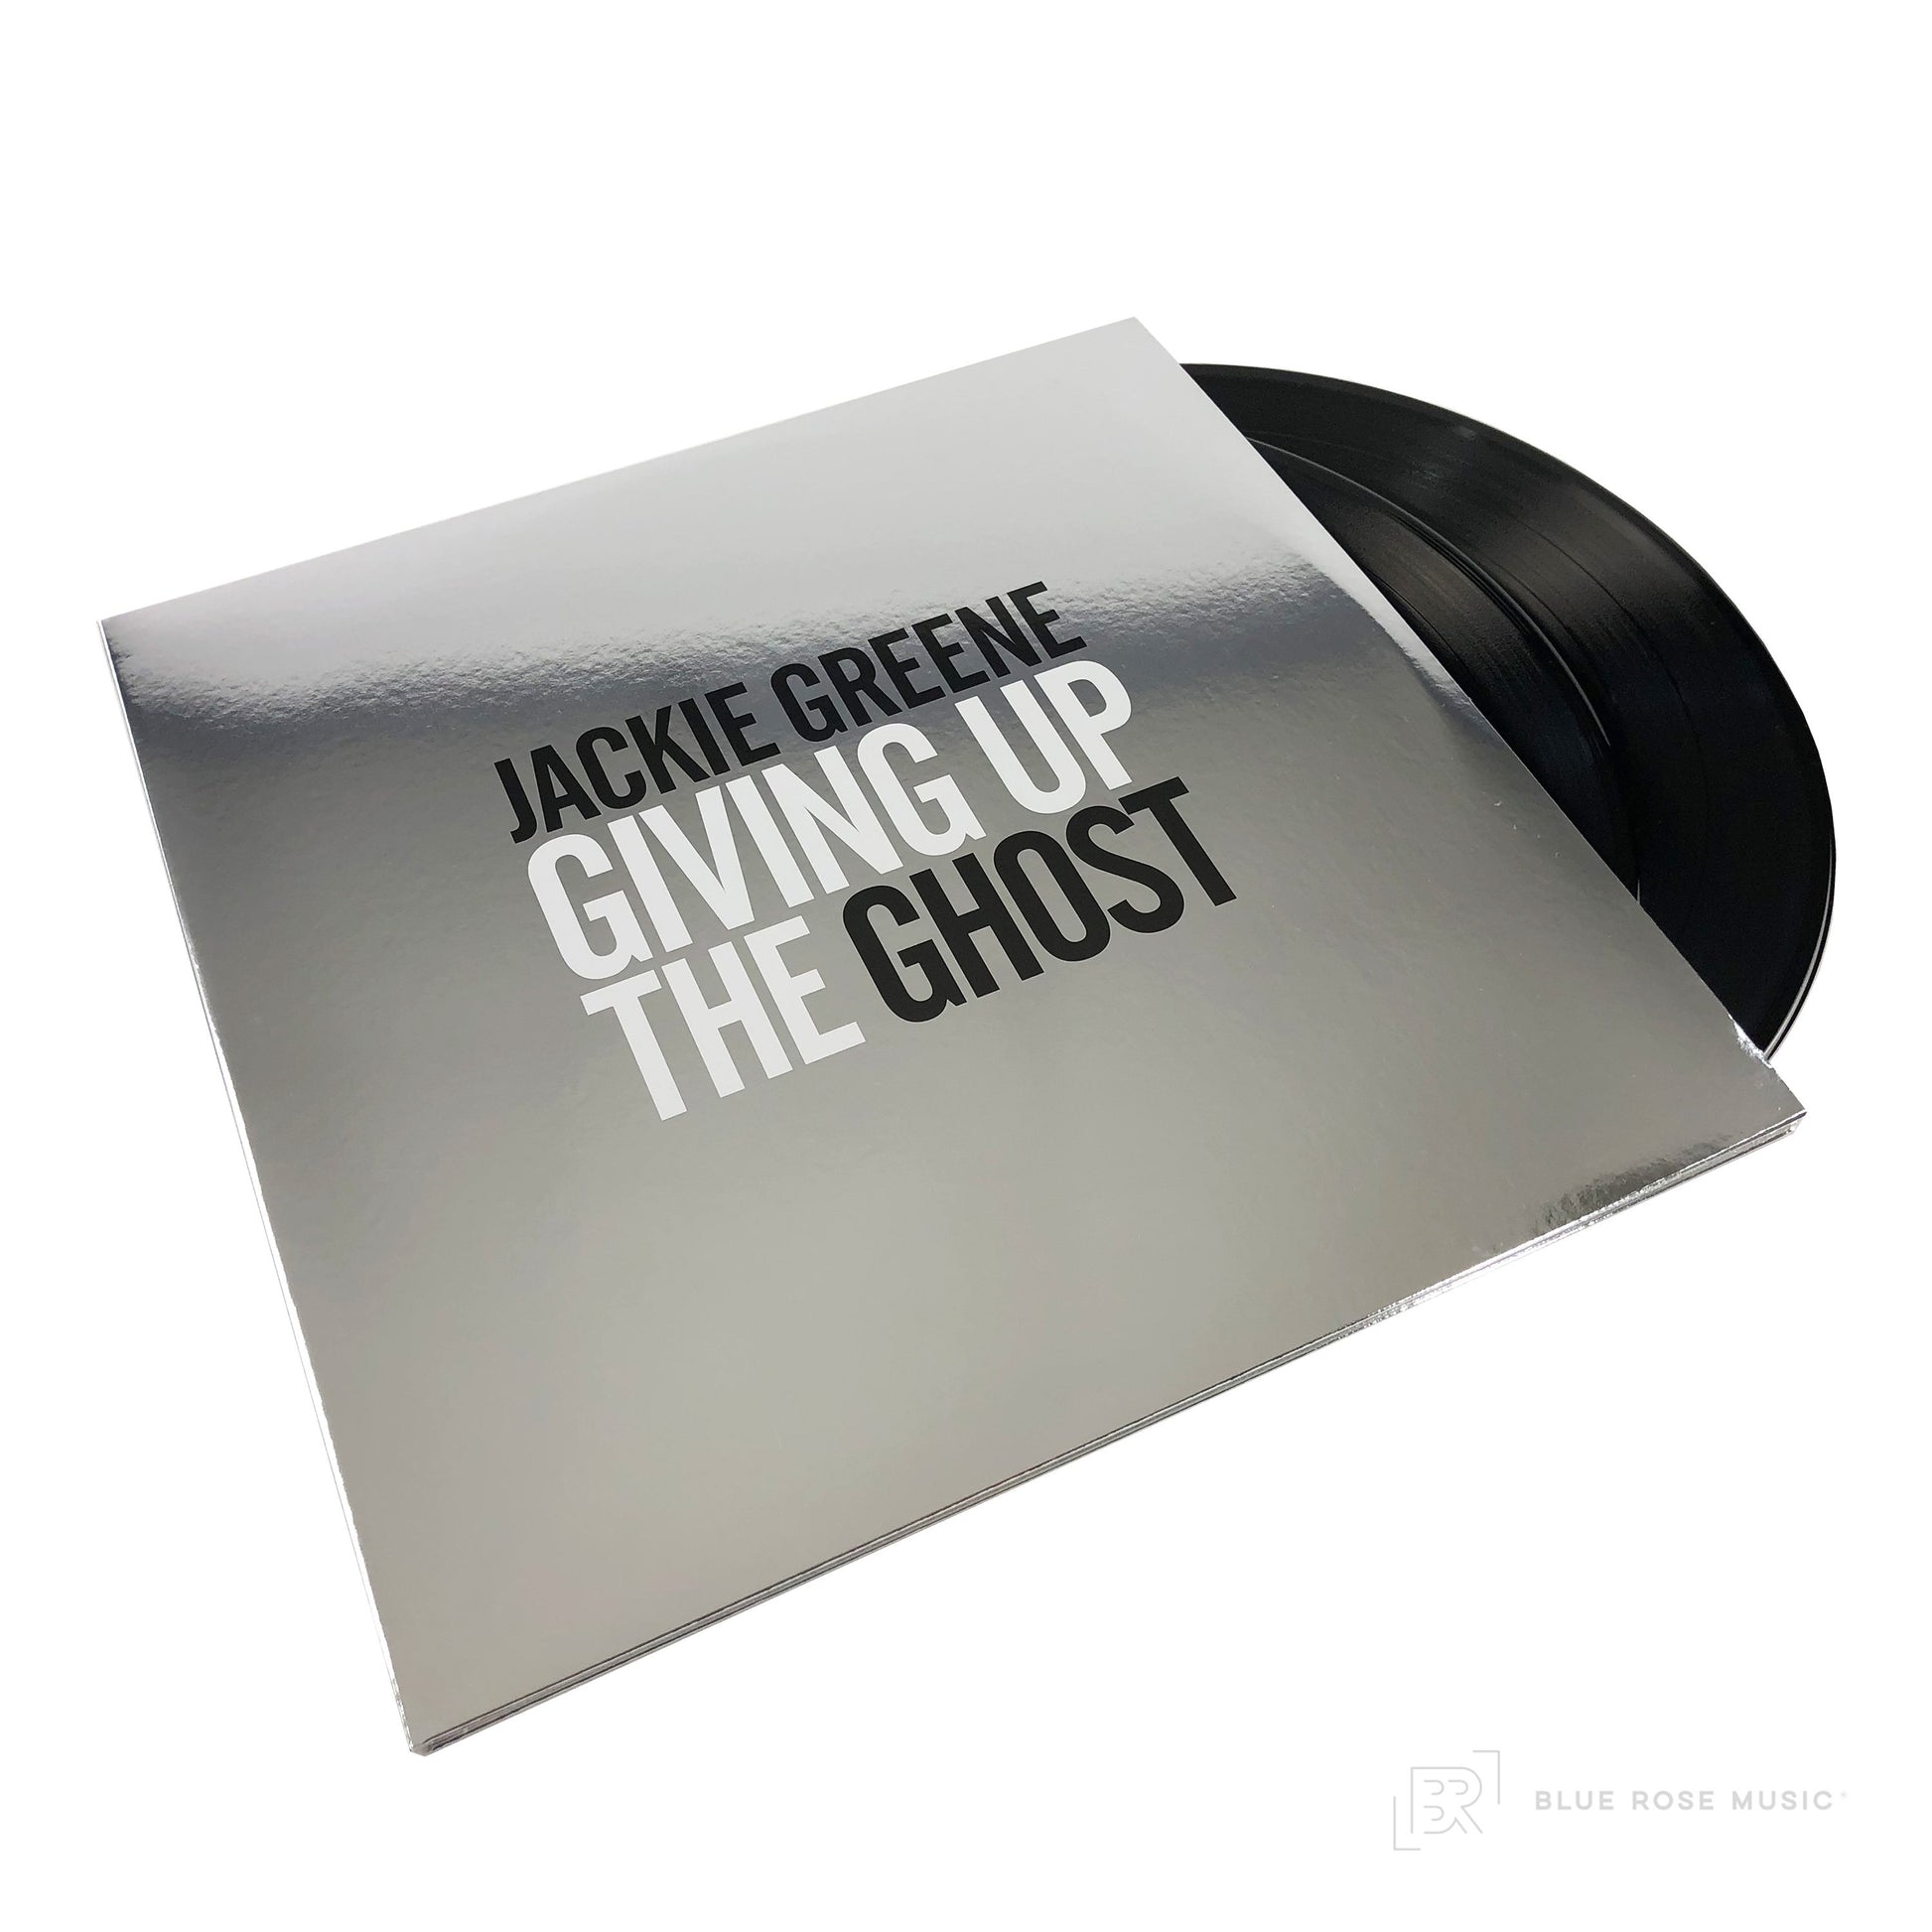 Jackie Greene's Giving Up the Ghost Vinyl